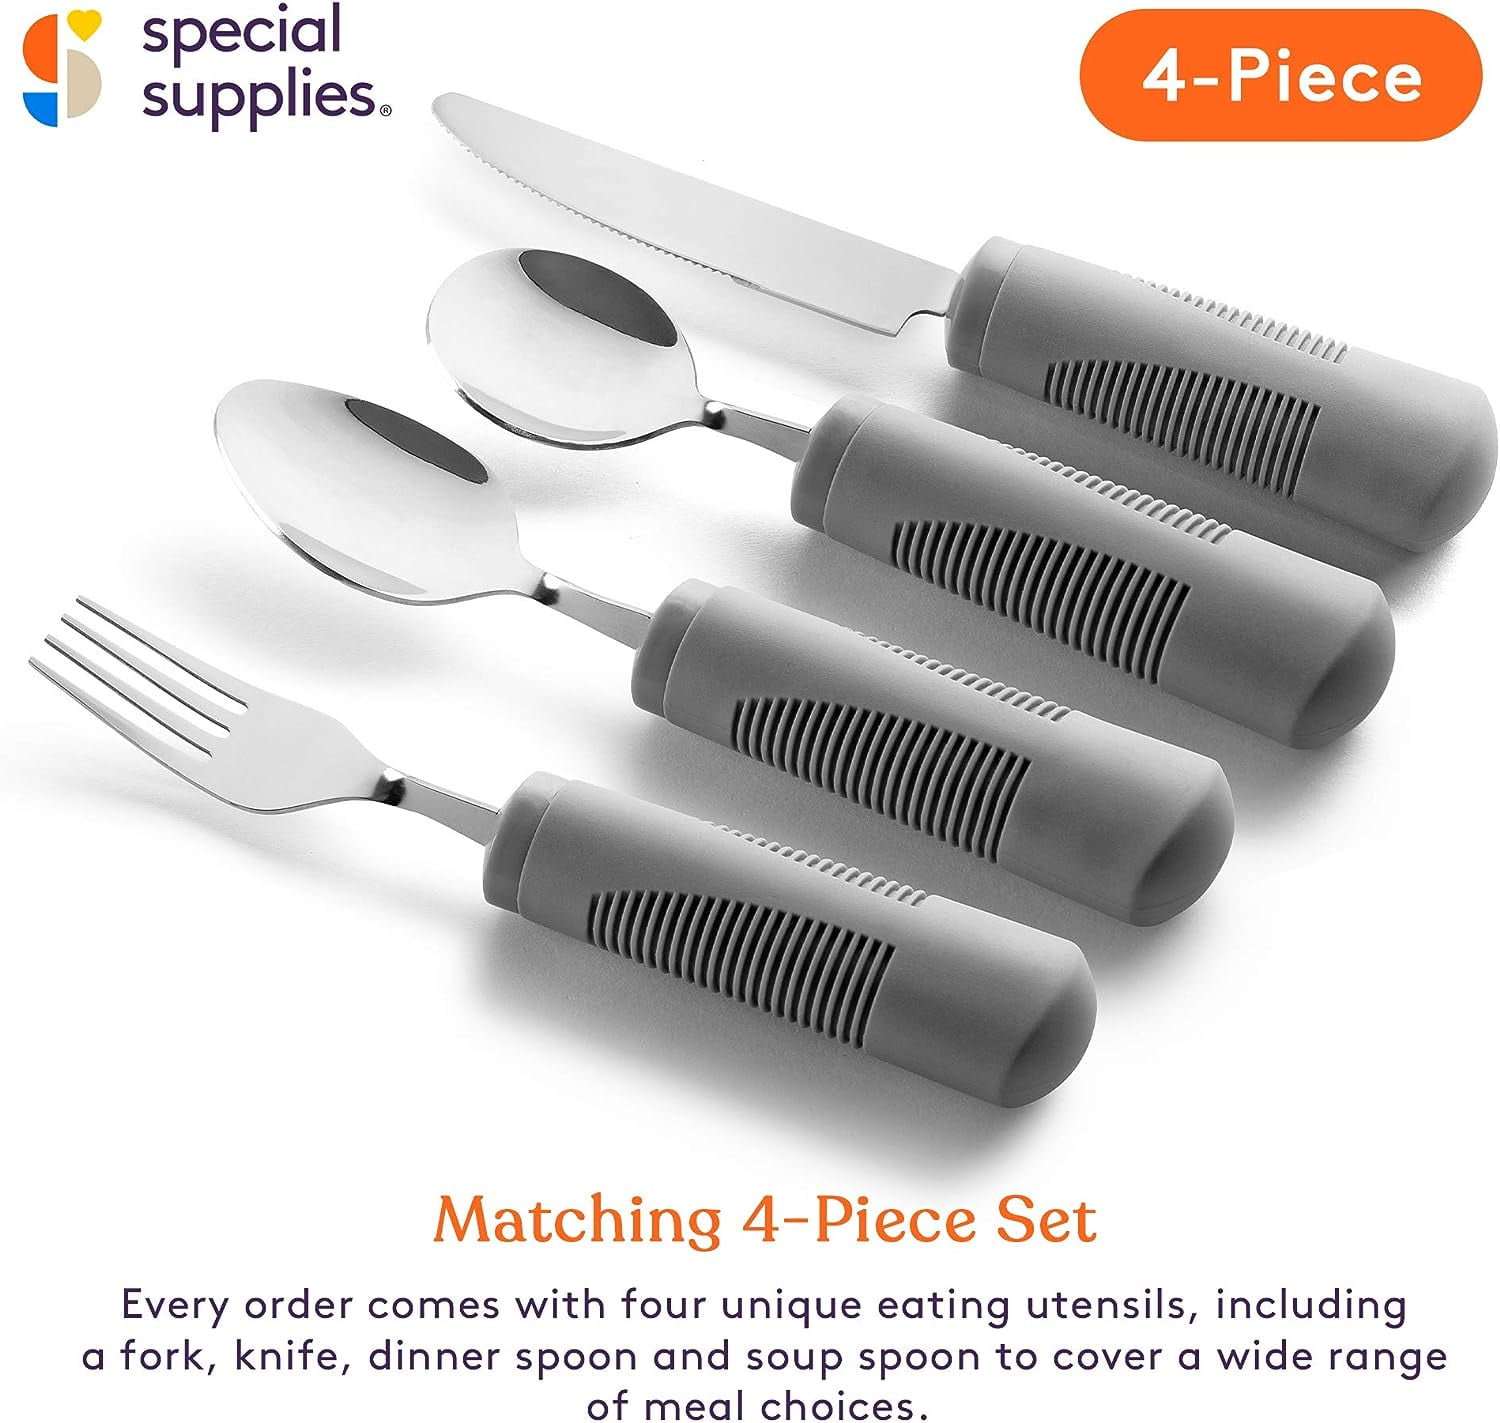  Adaptive Spoon, Universal Adjustable Hand Cuff Utensil Holder  Strap Adaptive Utensils Daily Living Aid for Elderly, Hand Tremors,  Arthritis, Parkinson's, Disability Gifts : Health & Household